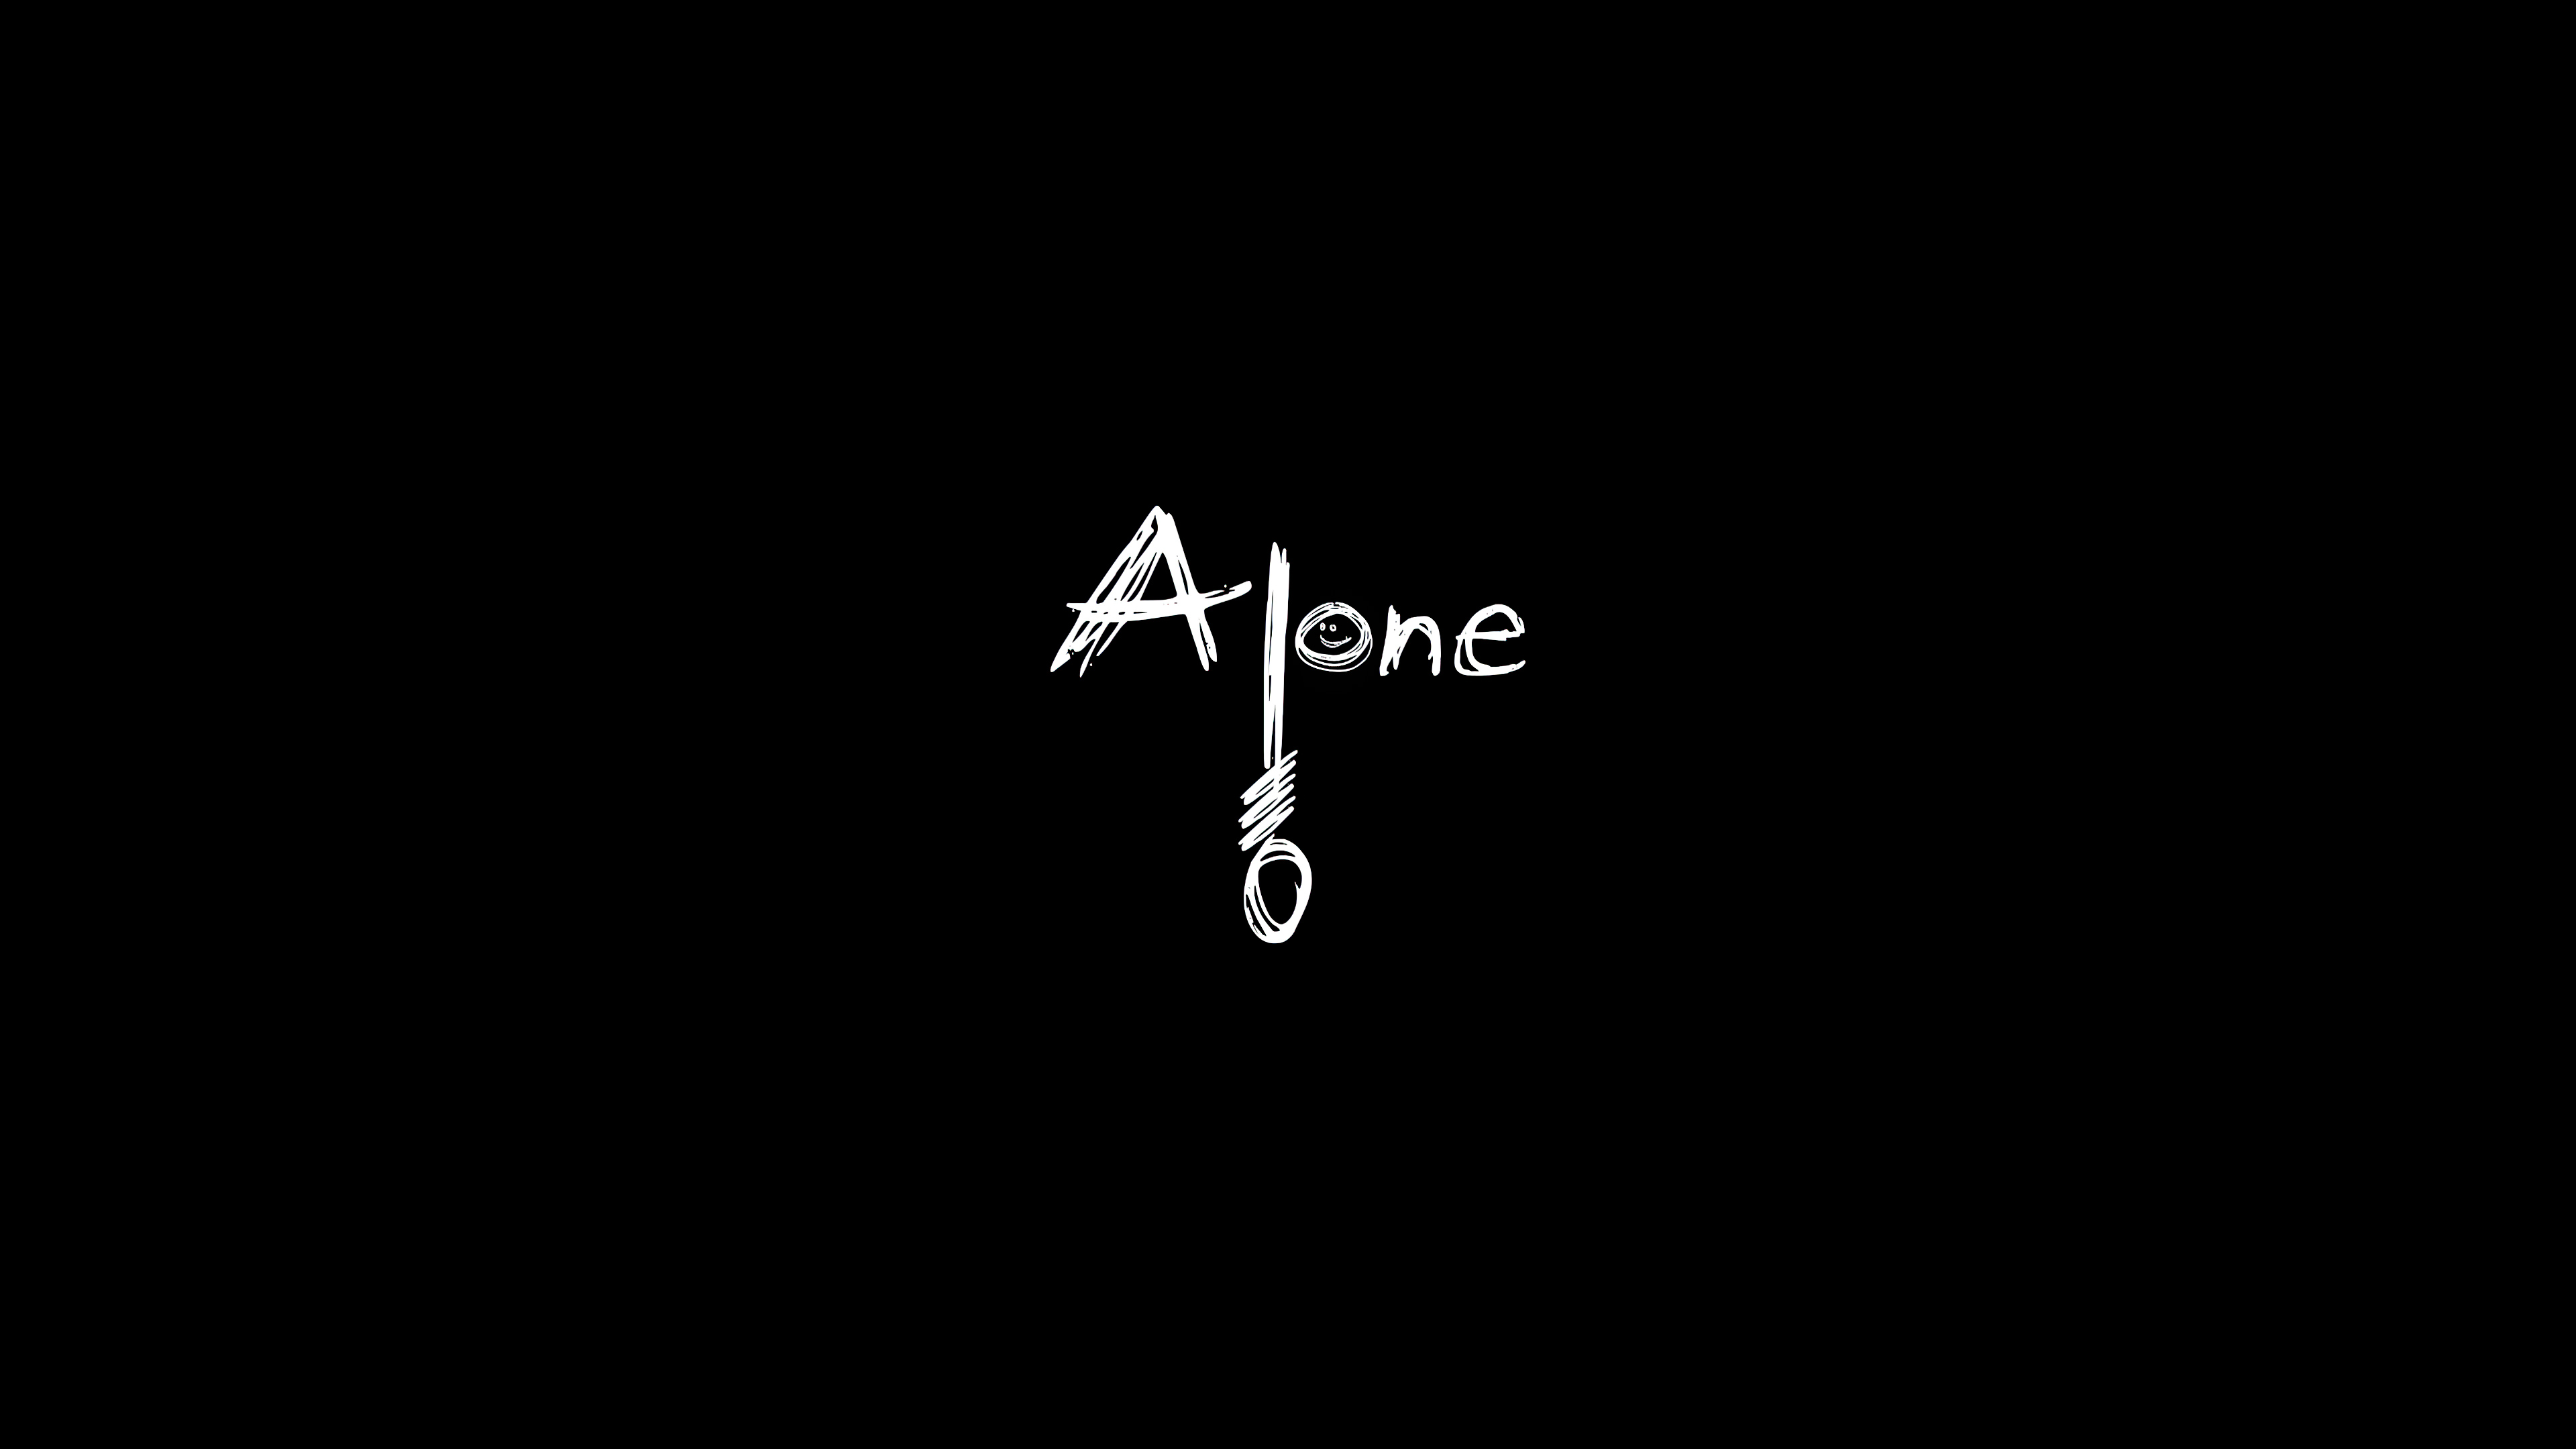 Alone Dark Typography 4k 1366x768 Resolution HD 4k Wallpaper, Image, Background, Photo and Picture